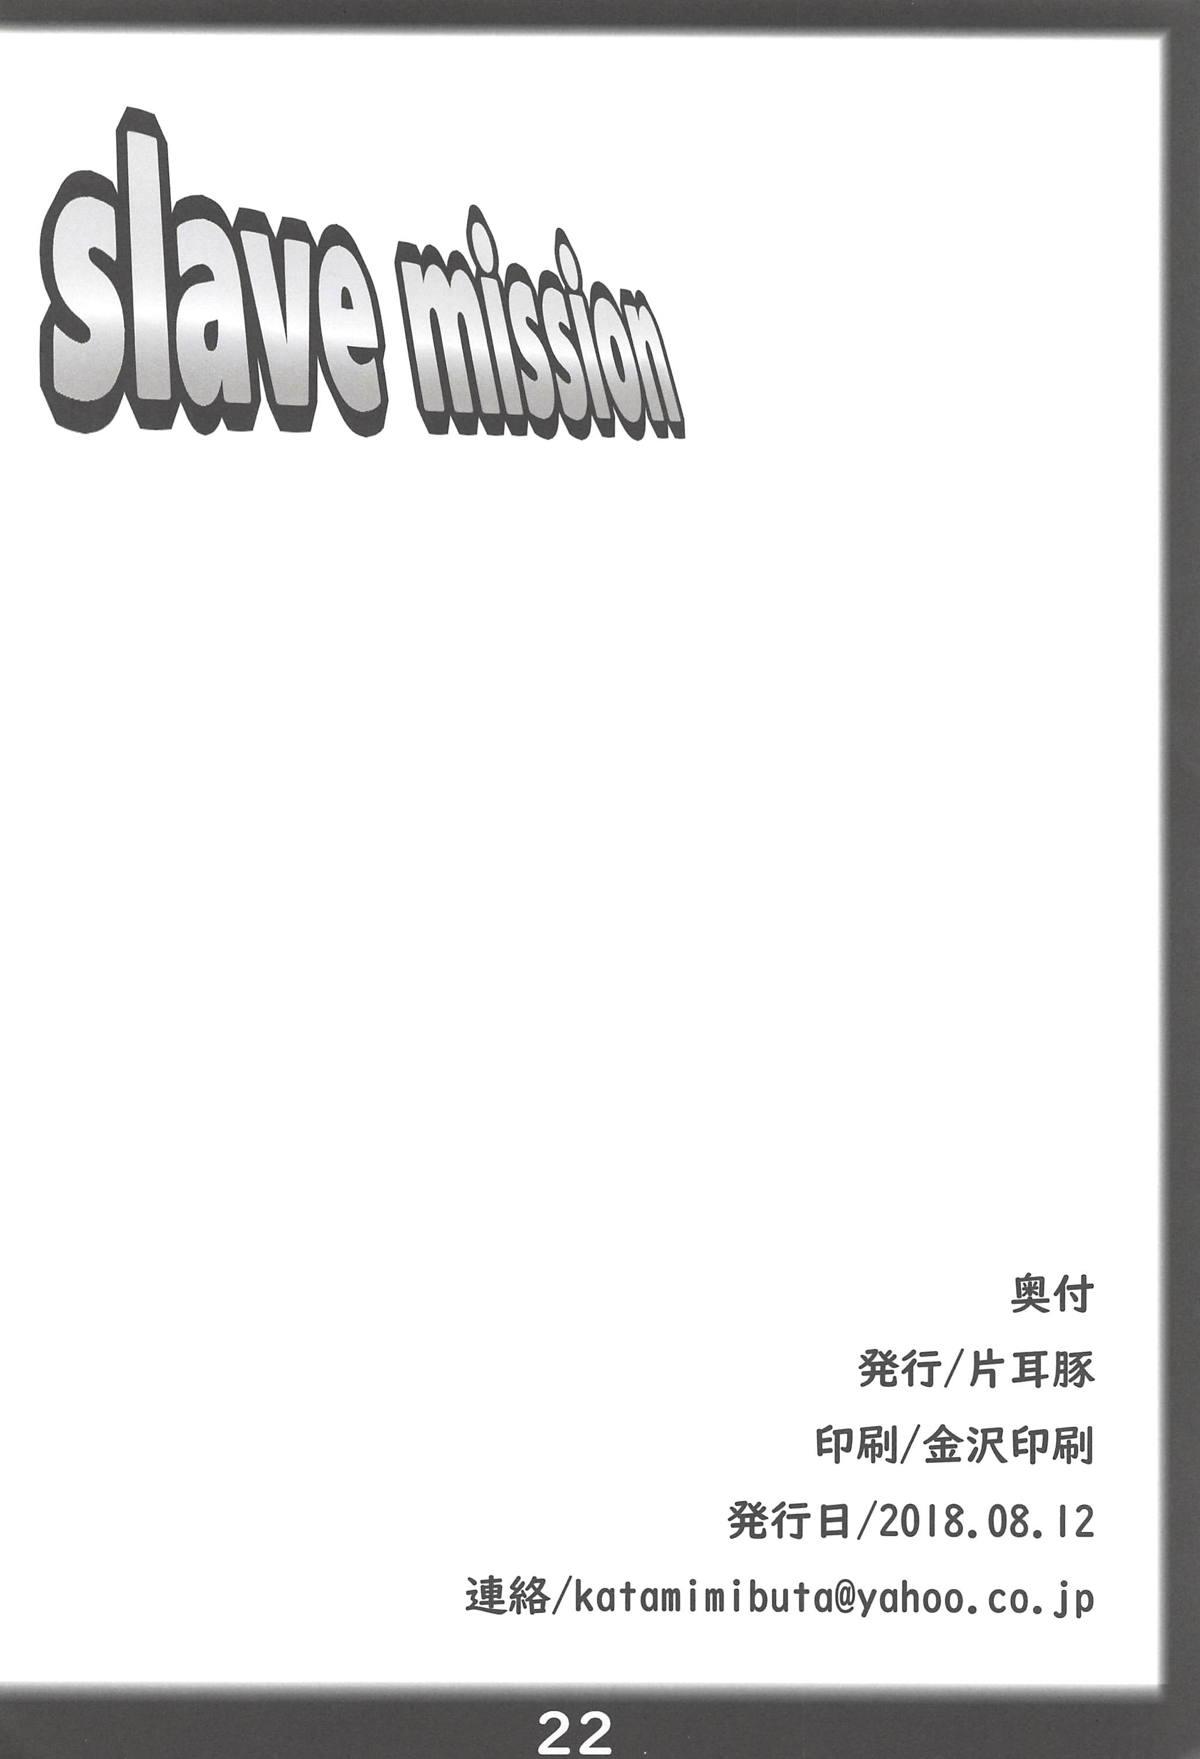 Gaysex slave mission - King of fighters Hotporn - Page 21